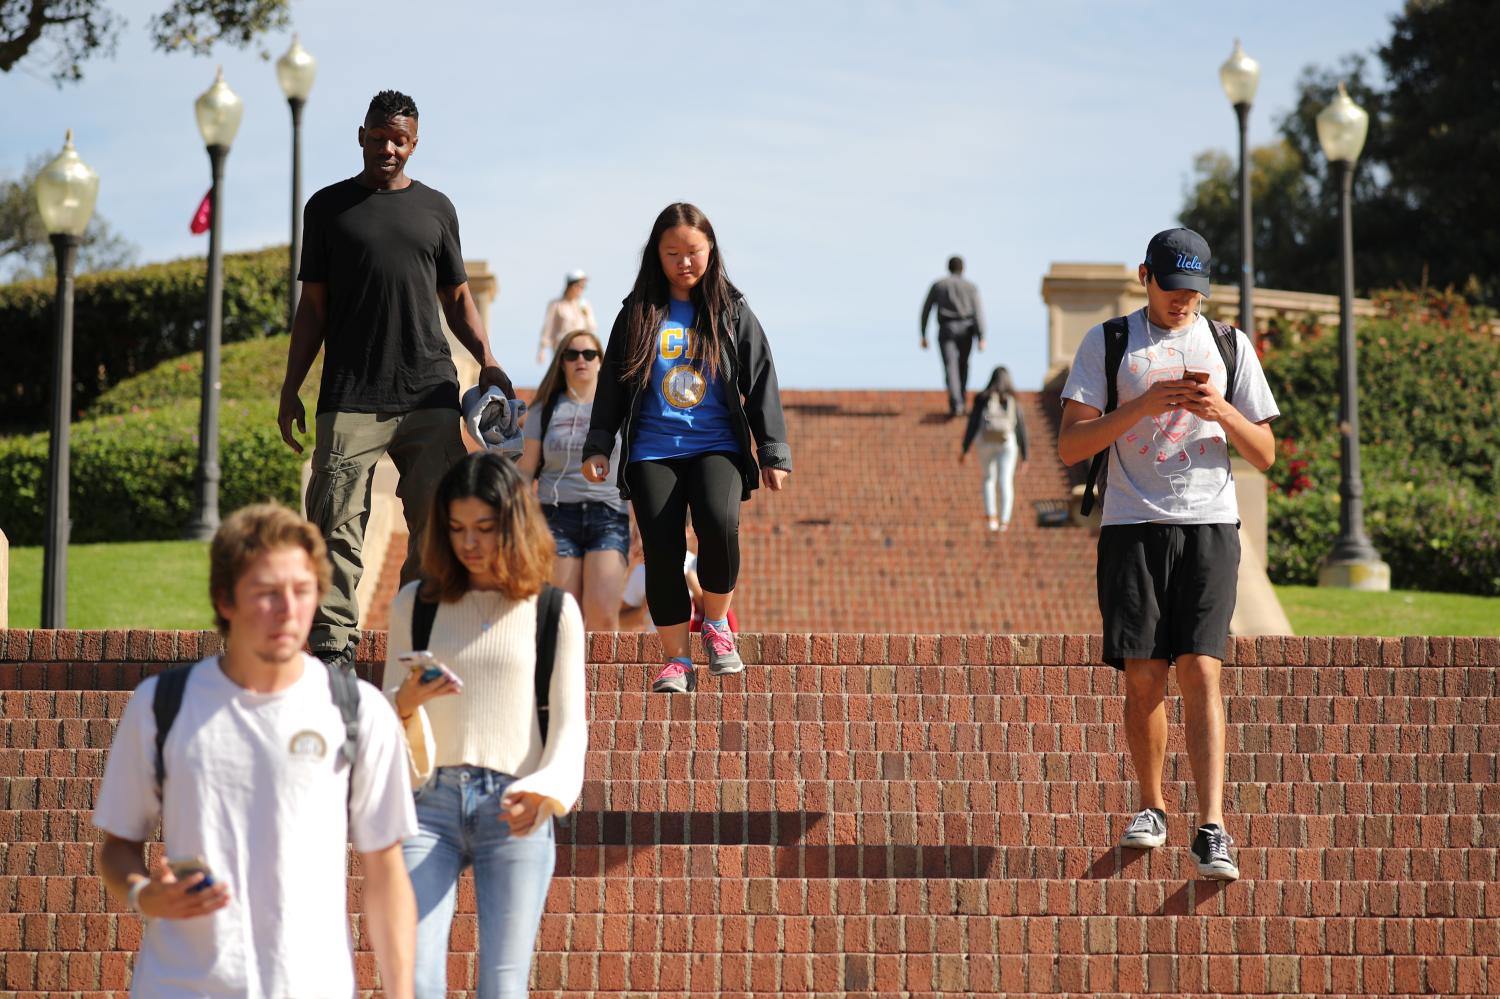 University of California Los Angeles (UCLA) students walk on the UCLA campus in Los Angeles